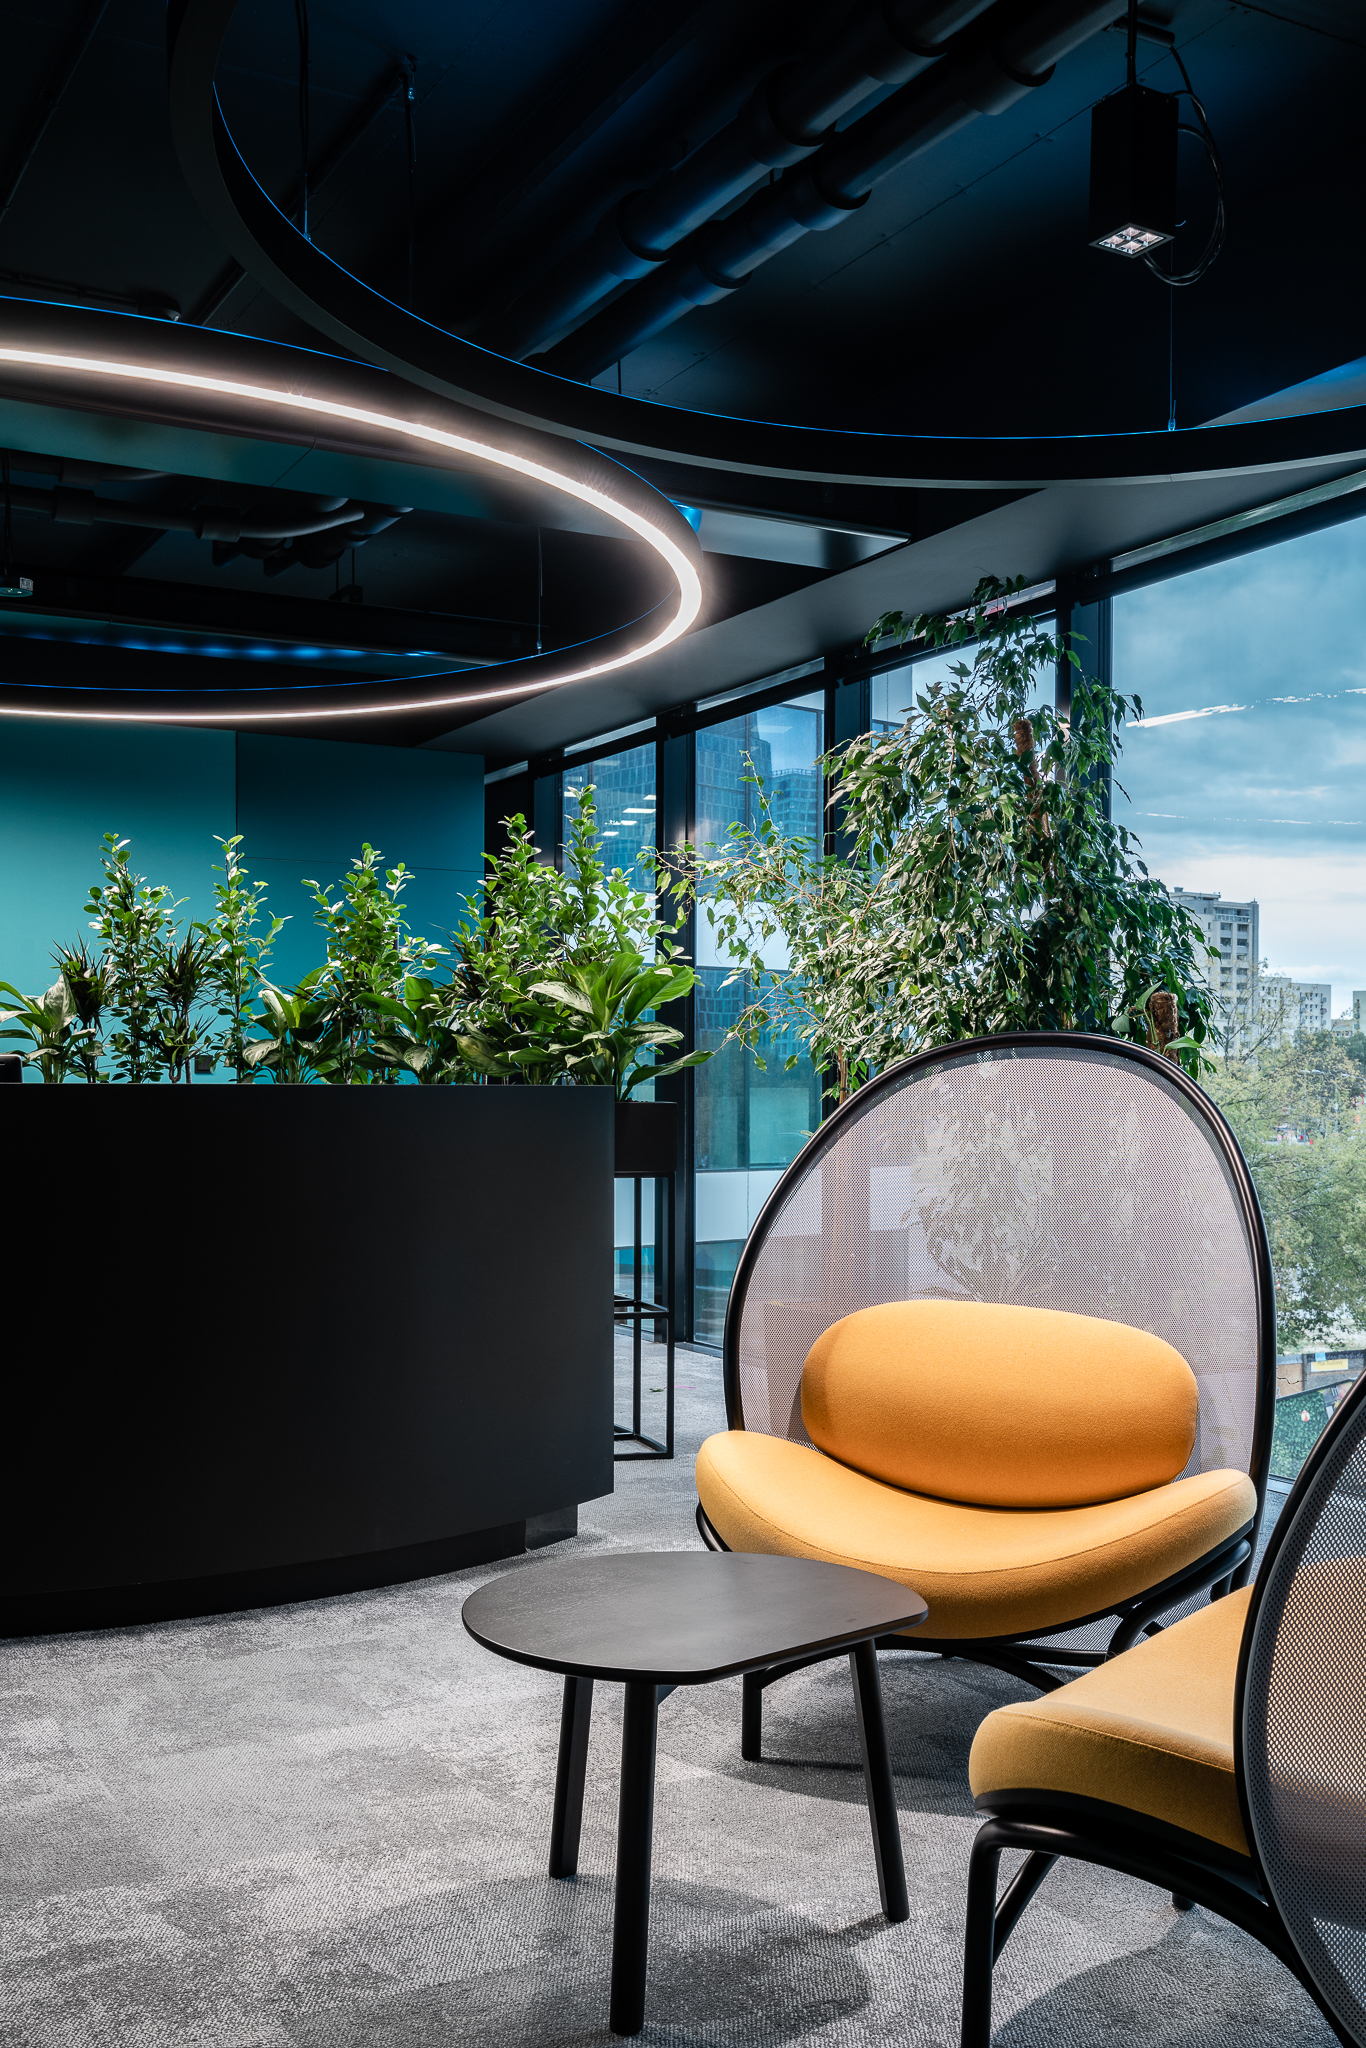 A Tour of UPC’s Biophilic Warsaw Office